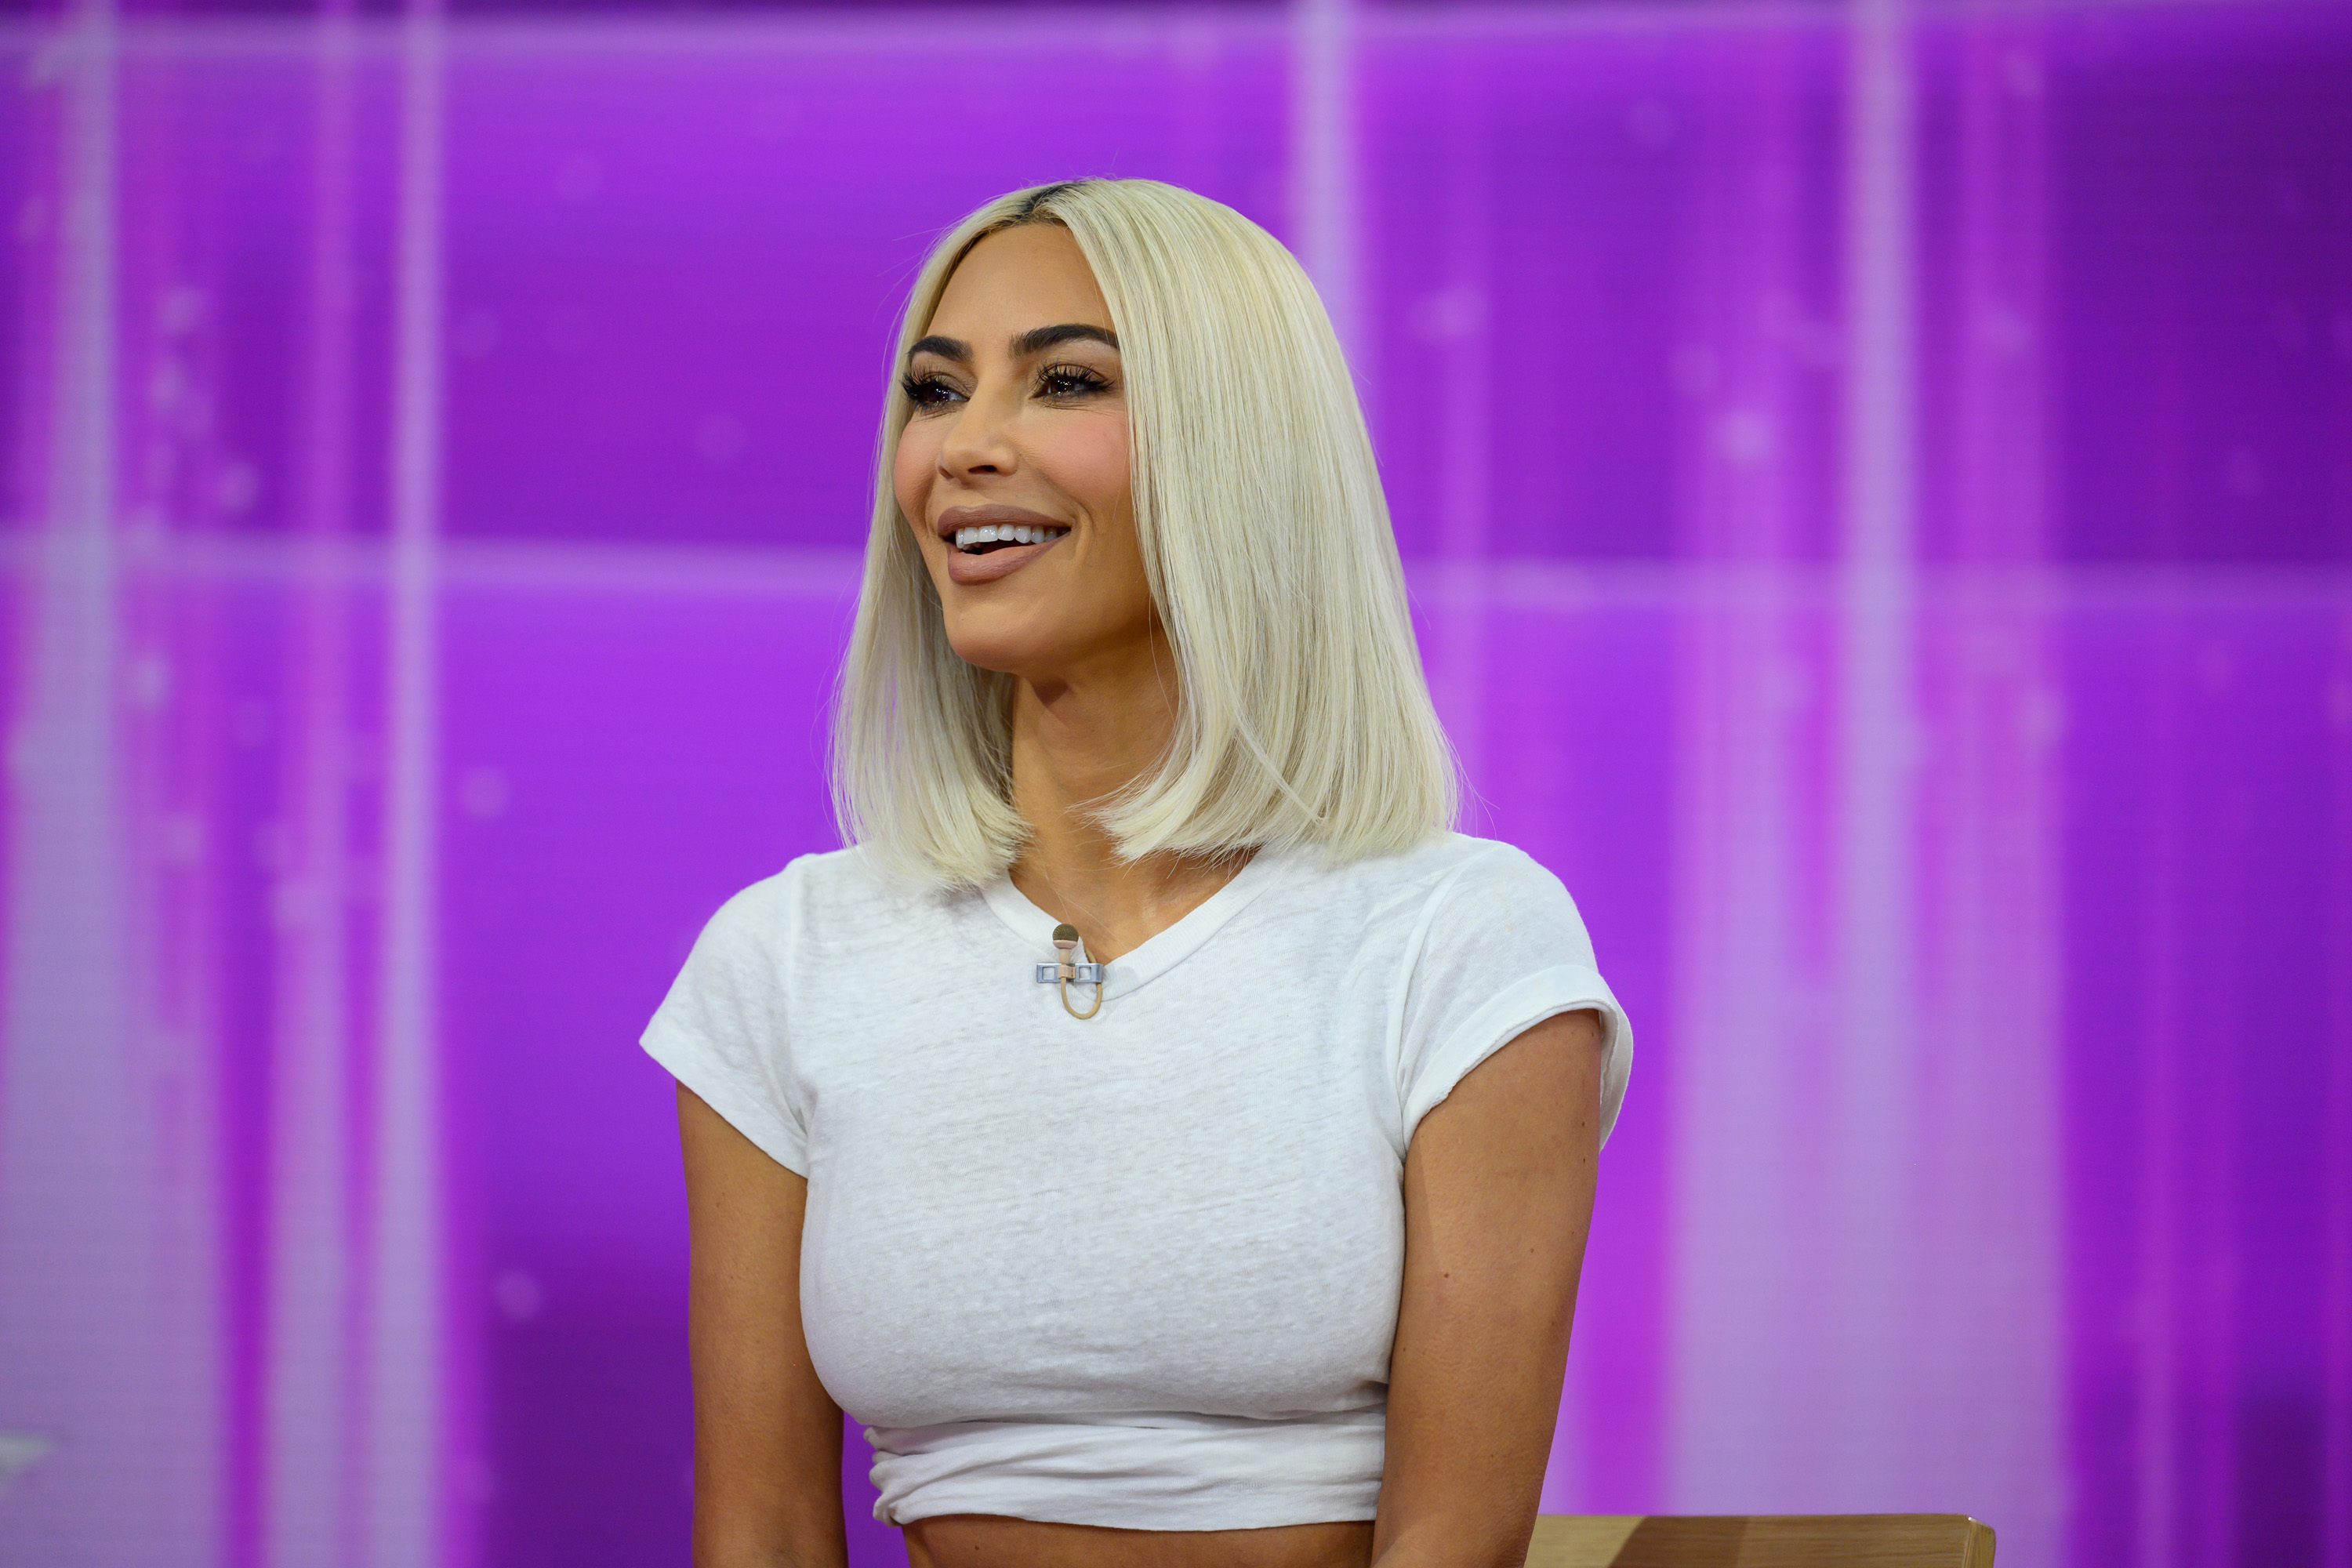 GettyImages-1241465614 Kim Kardashian Reveals She Had ‘Painful' Stomach Tightening Procedure